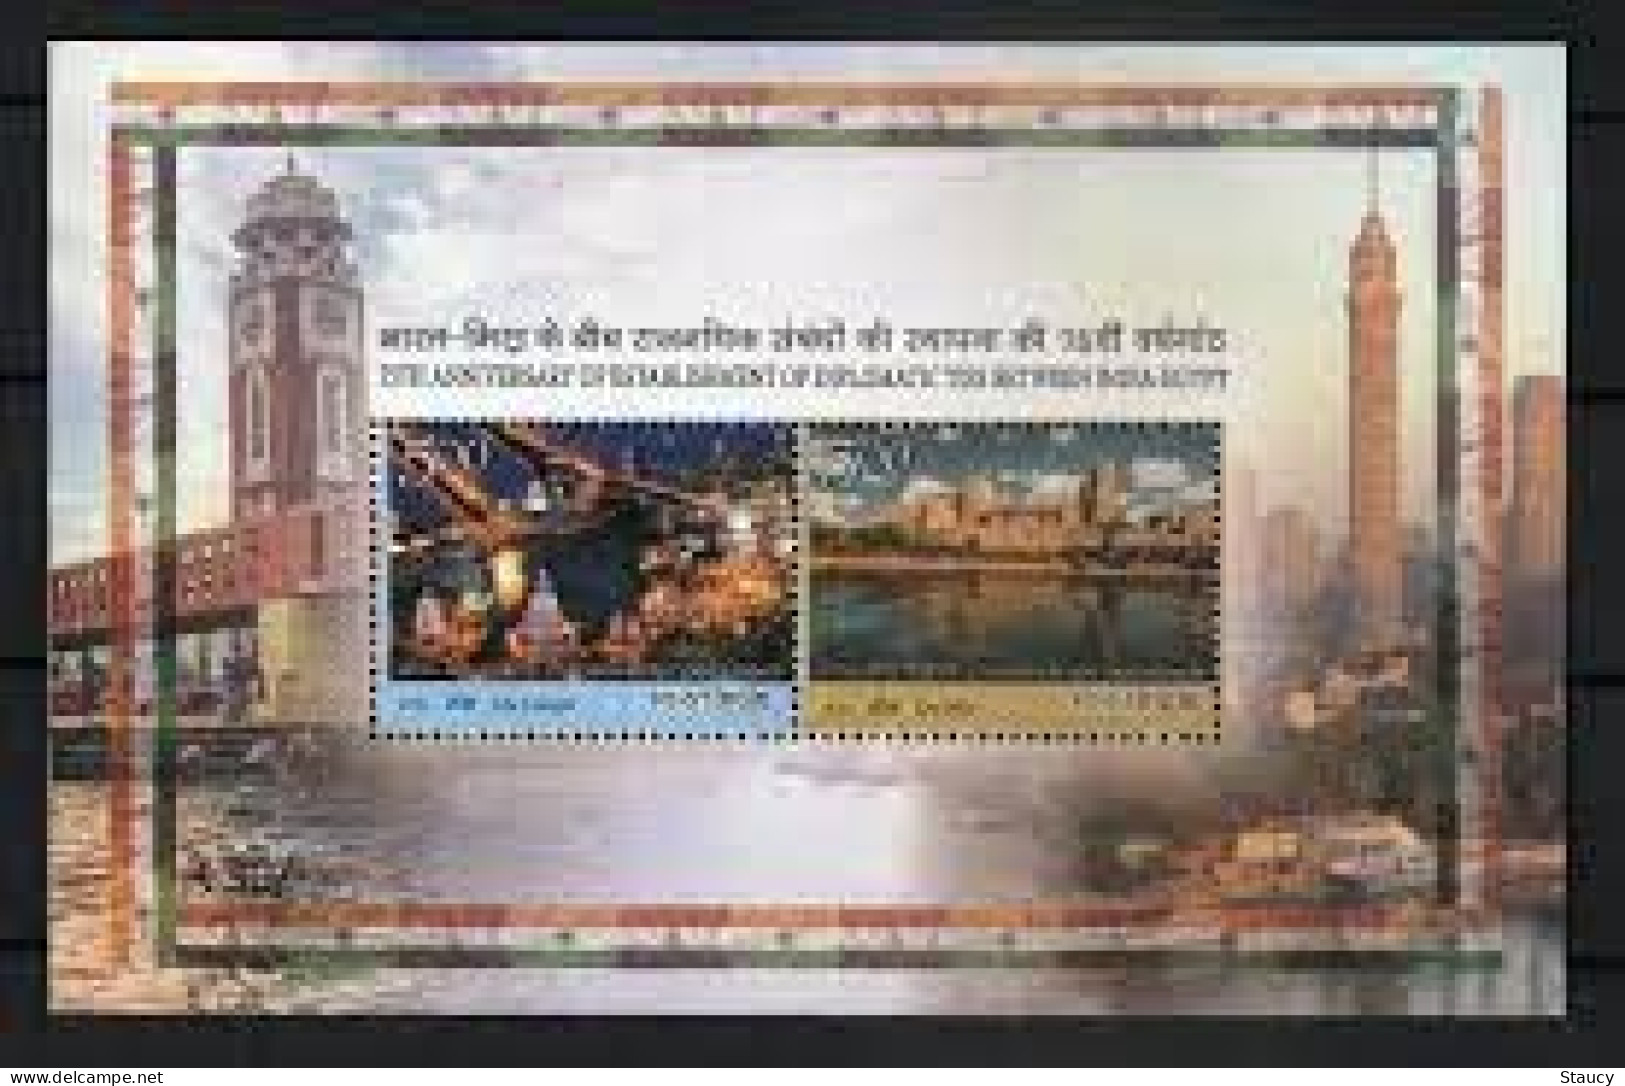 India 2023 Complete Year Collection Of 11 MS / SS MNH Year Pack As Per Scan RARE To Get - Full Years